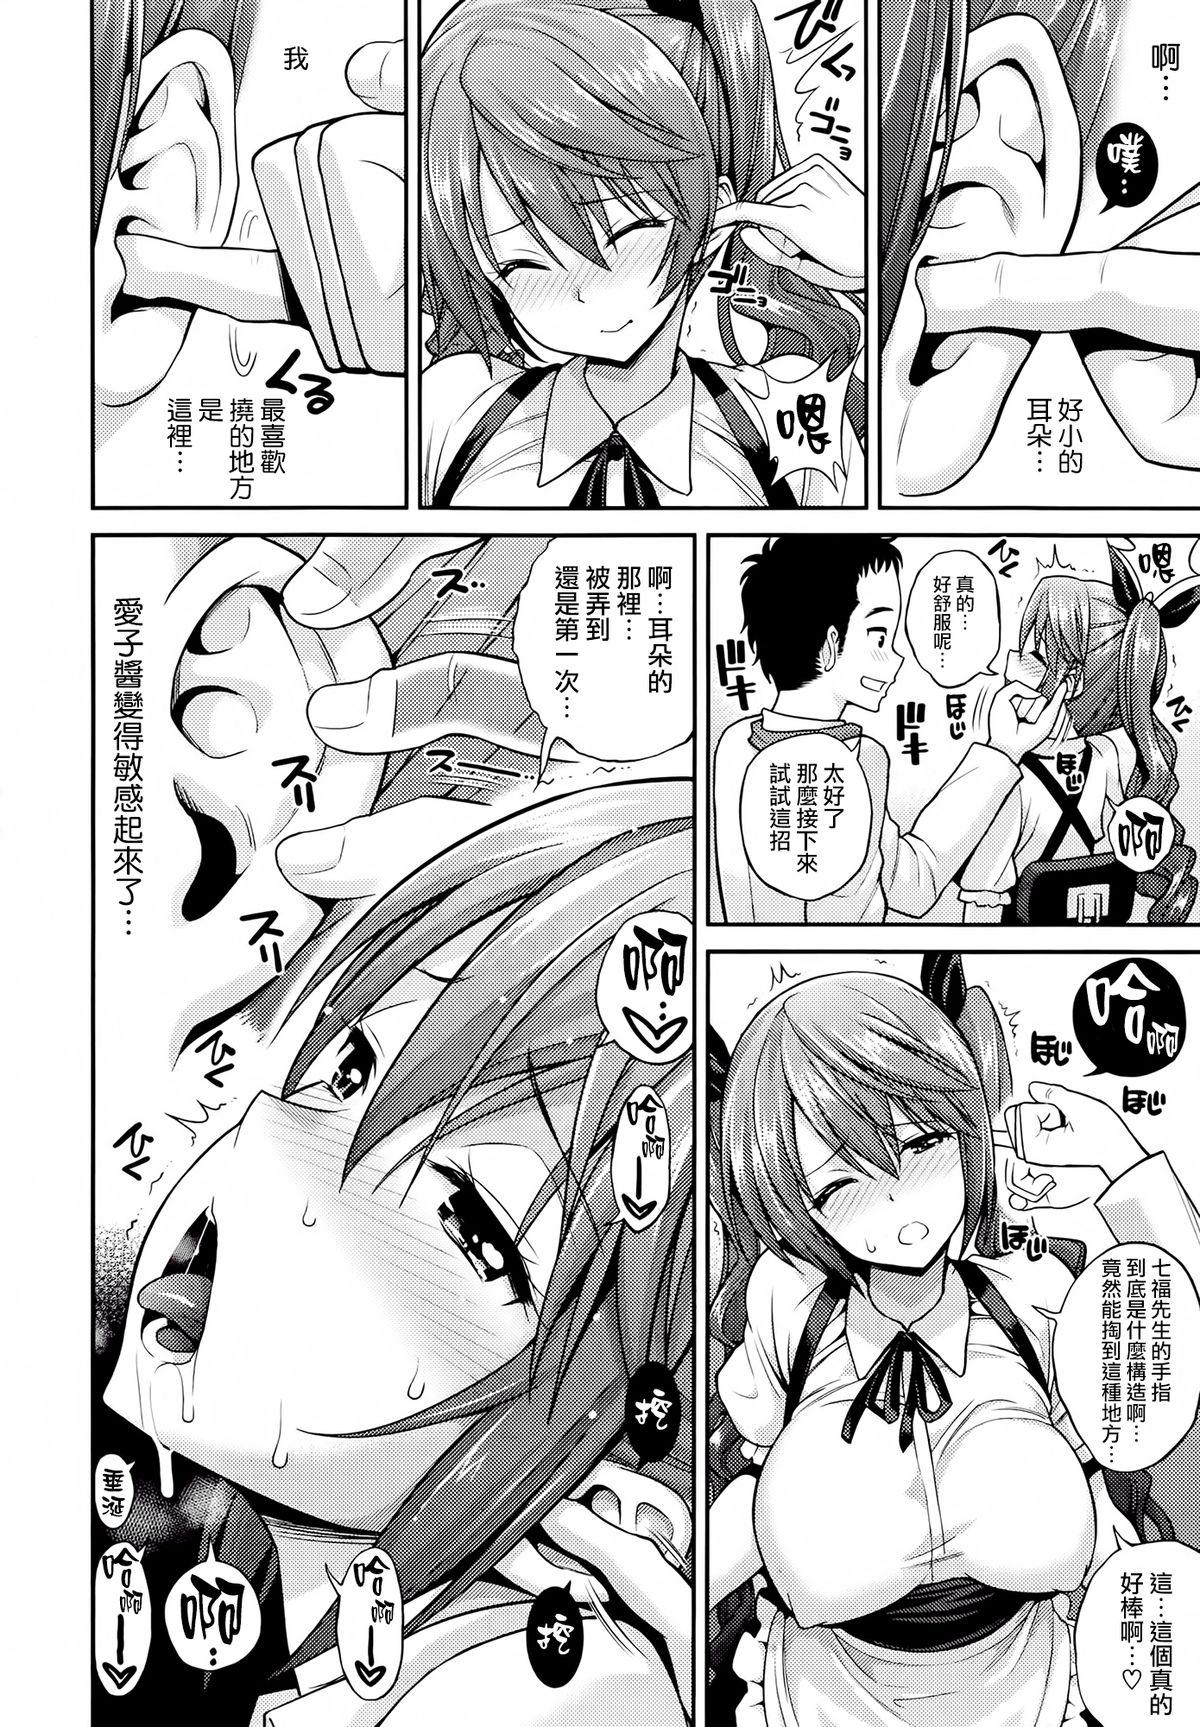 Hottie ラブ ほじる Ex Girlfriends - Page 6